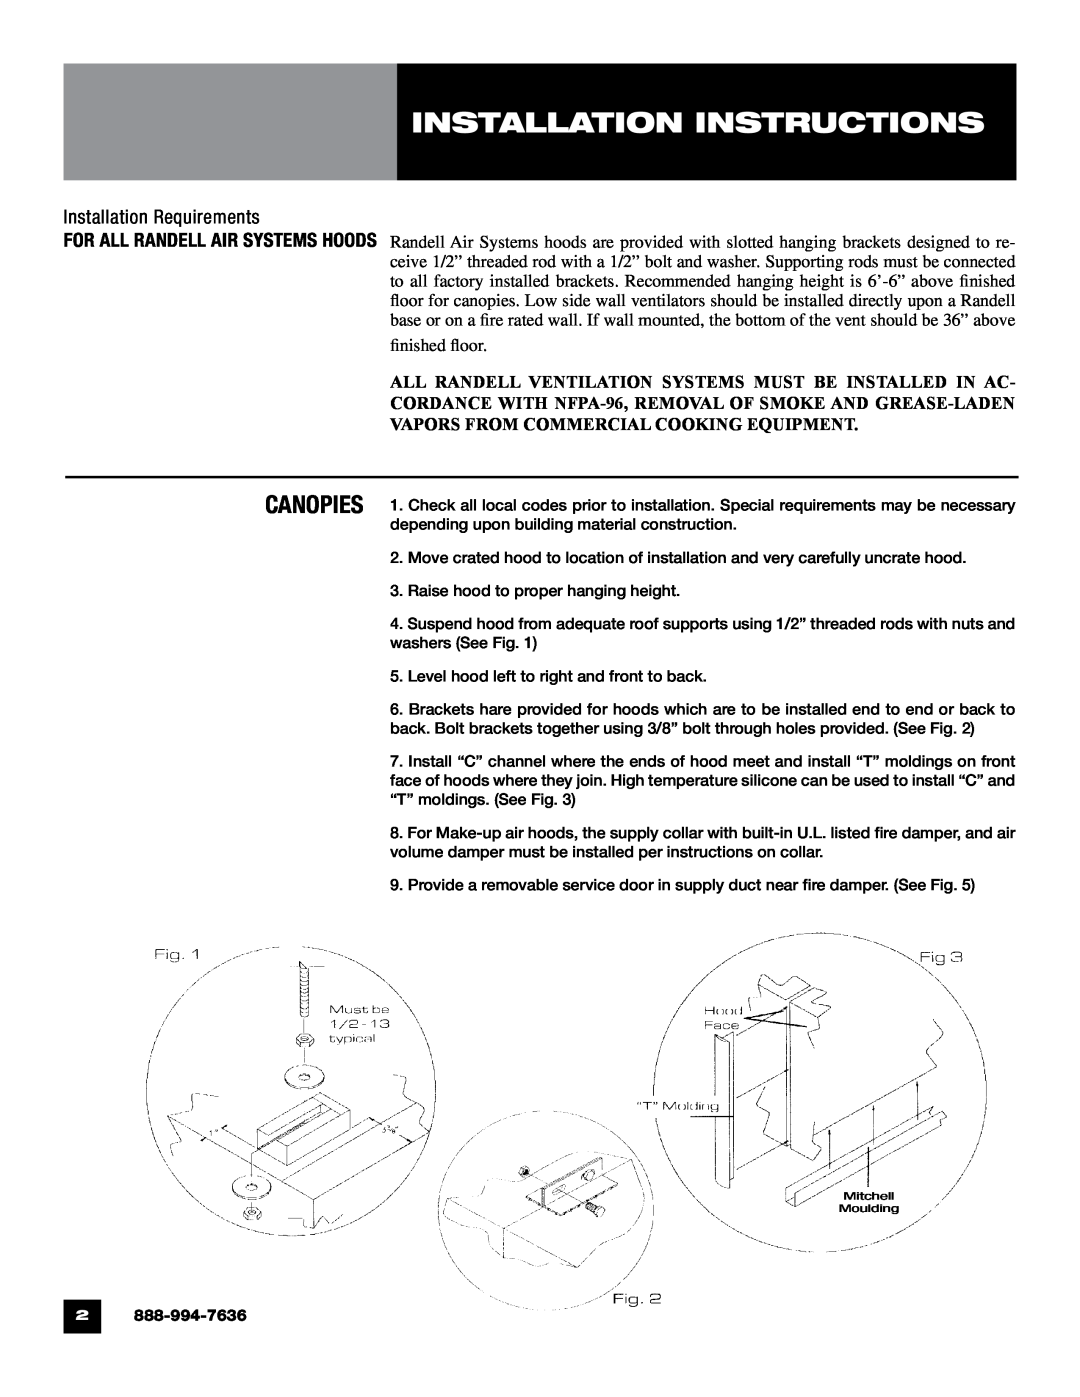 Unified Brands Kitchen Ventilation Systems operating instructions Installation Instructions, Installation Requirements 